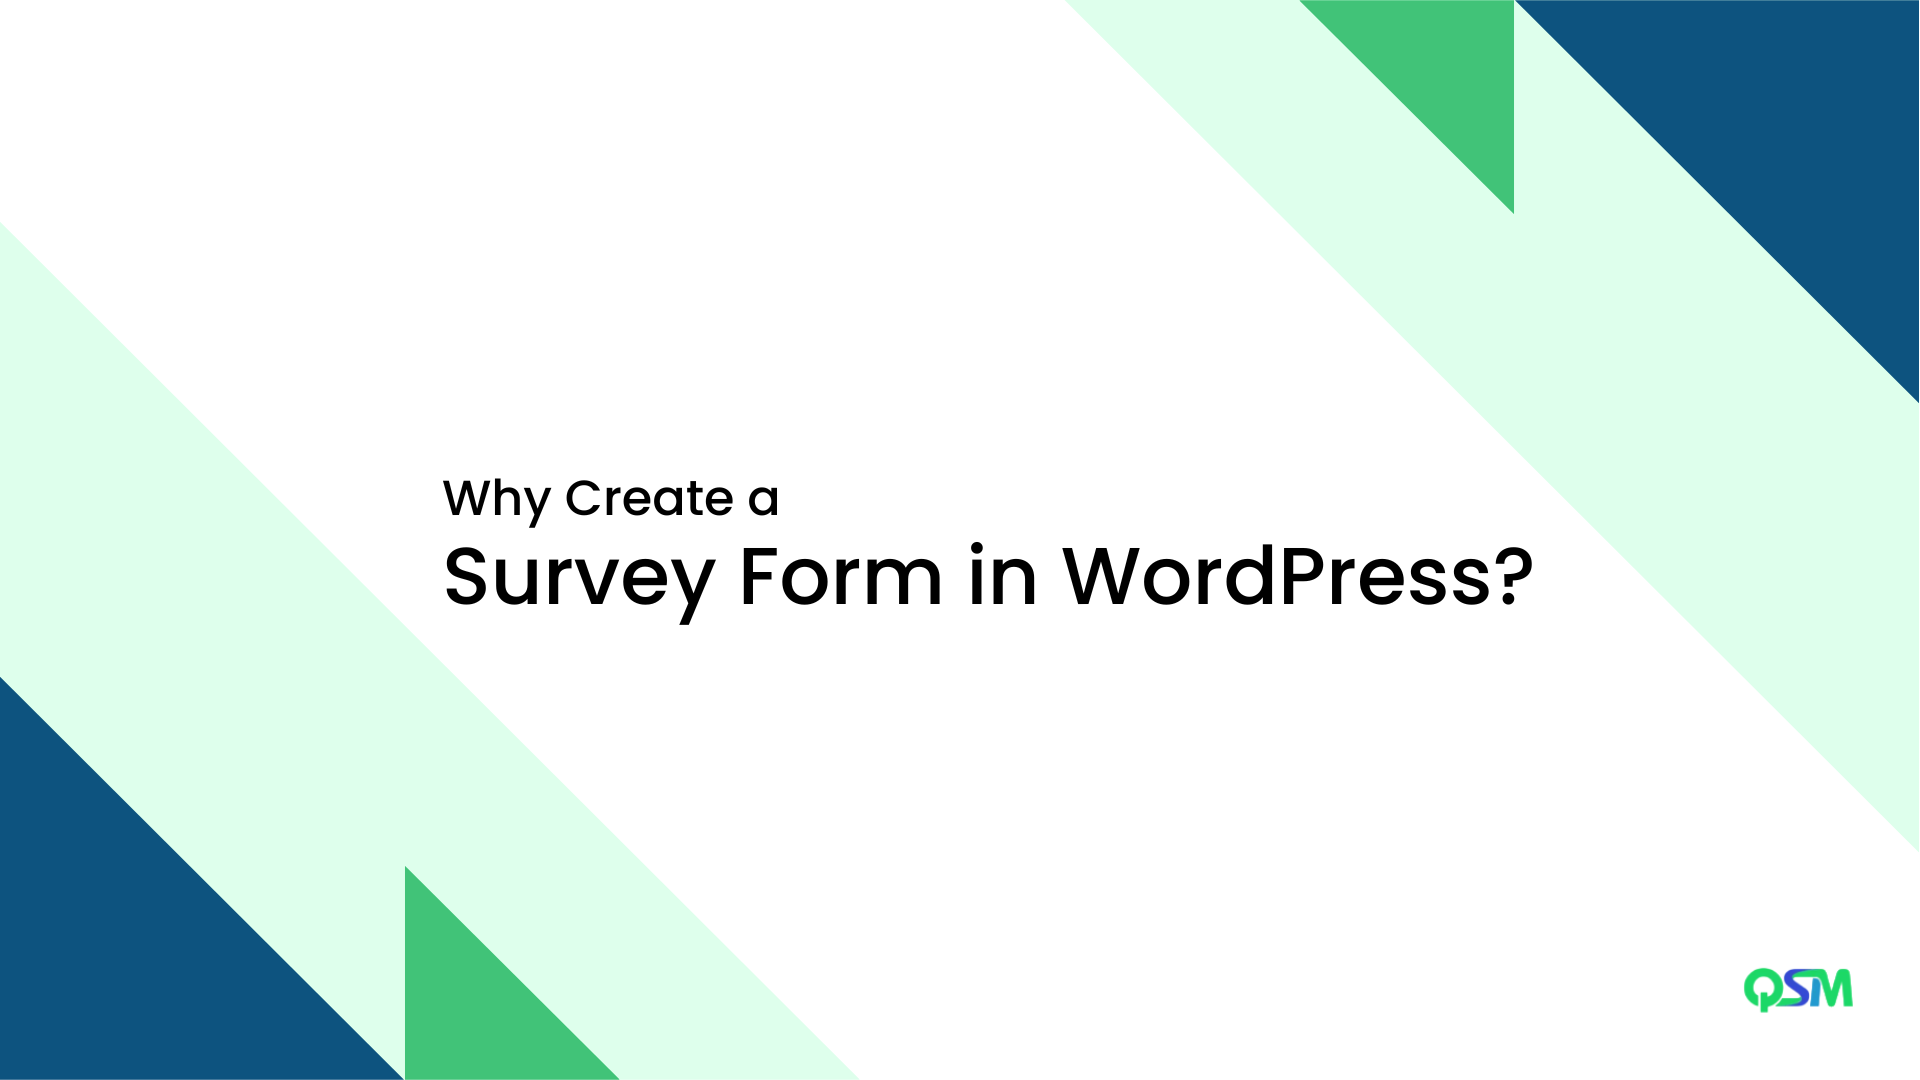 Why Create a Survey Form in WordPress?